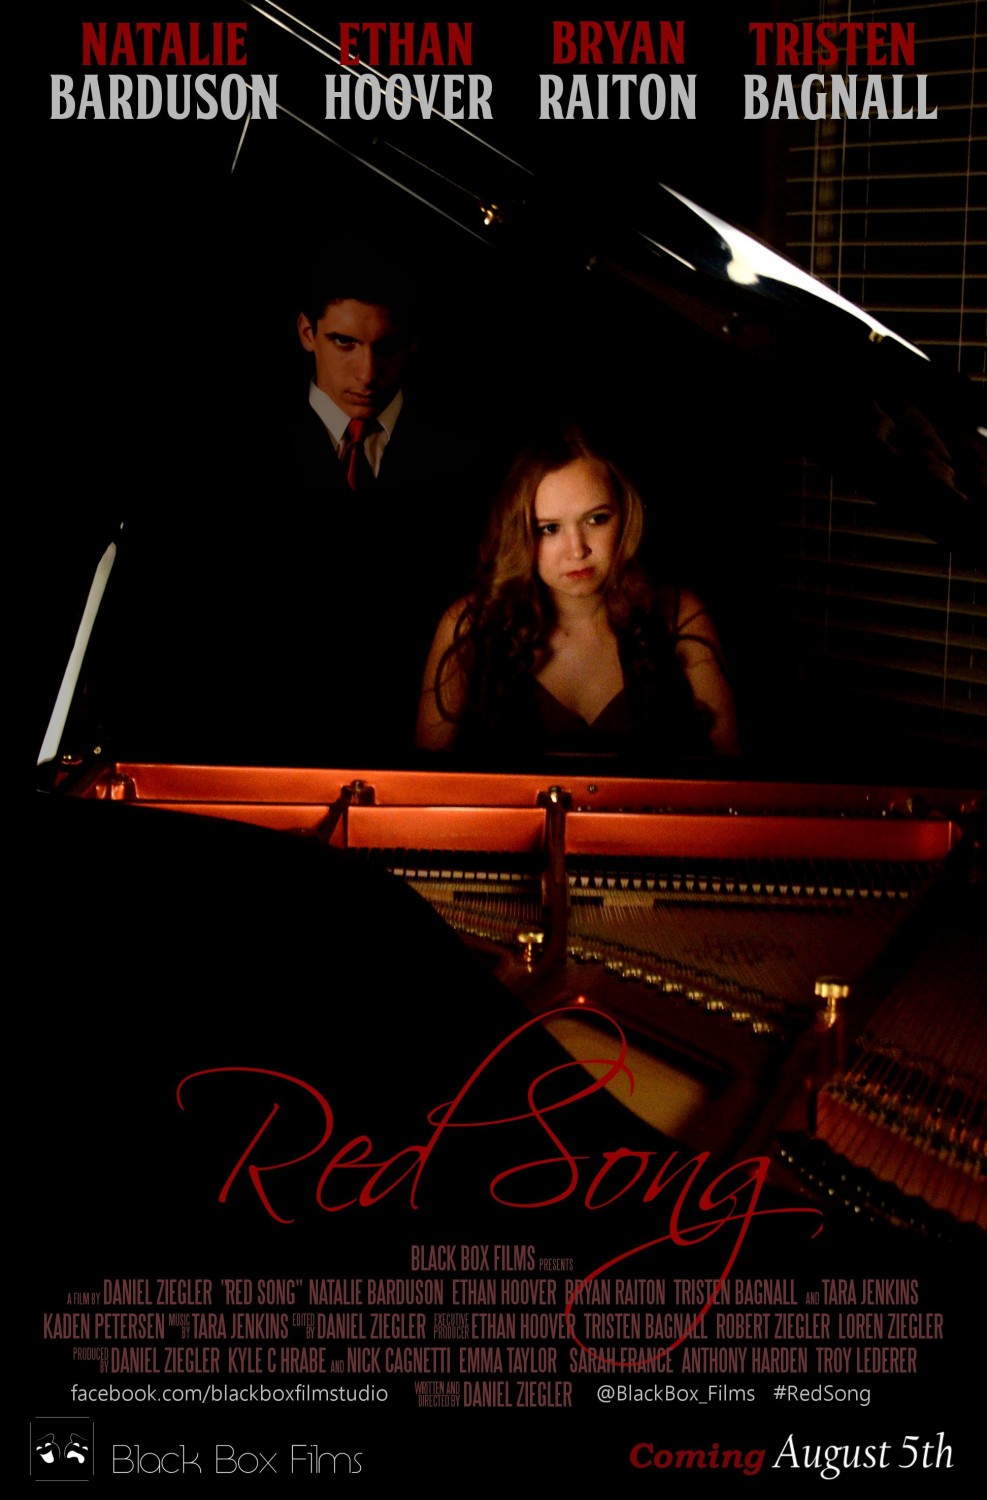 Extra Large Movie Poster Image for Red Song